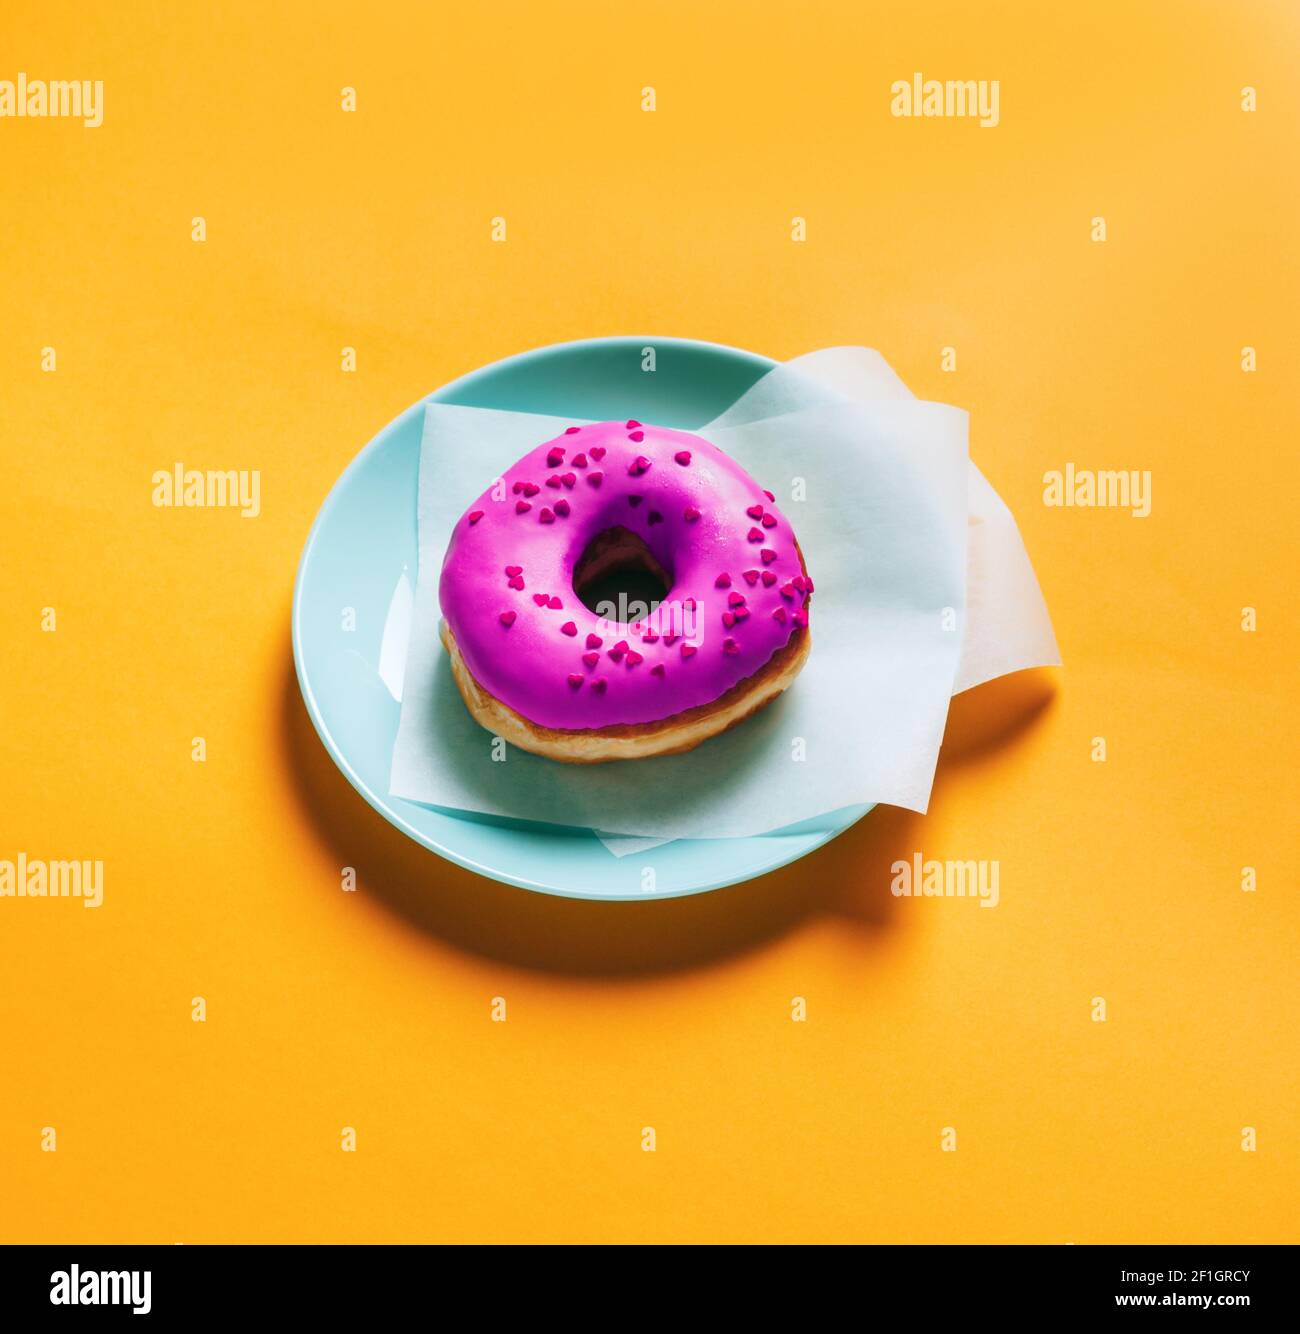 Healthy wholegrain purple donut with berry jam and hearts sprinkling served on a blue plate. Isolated yellow square backdrop for social media posting Stock Photo